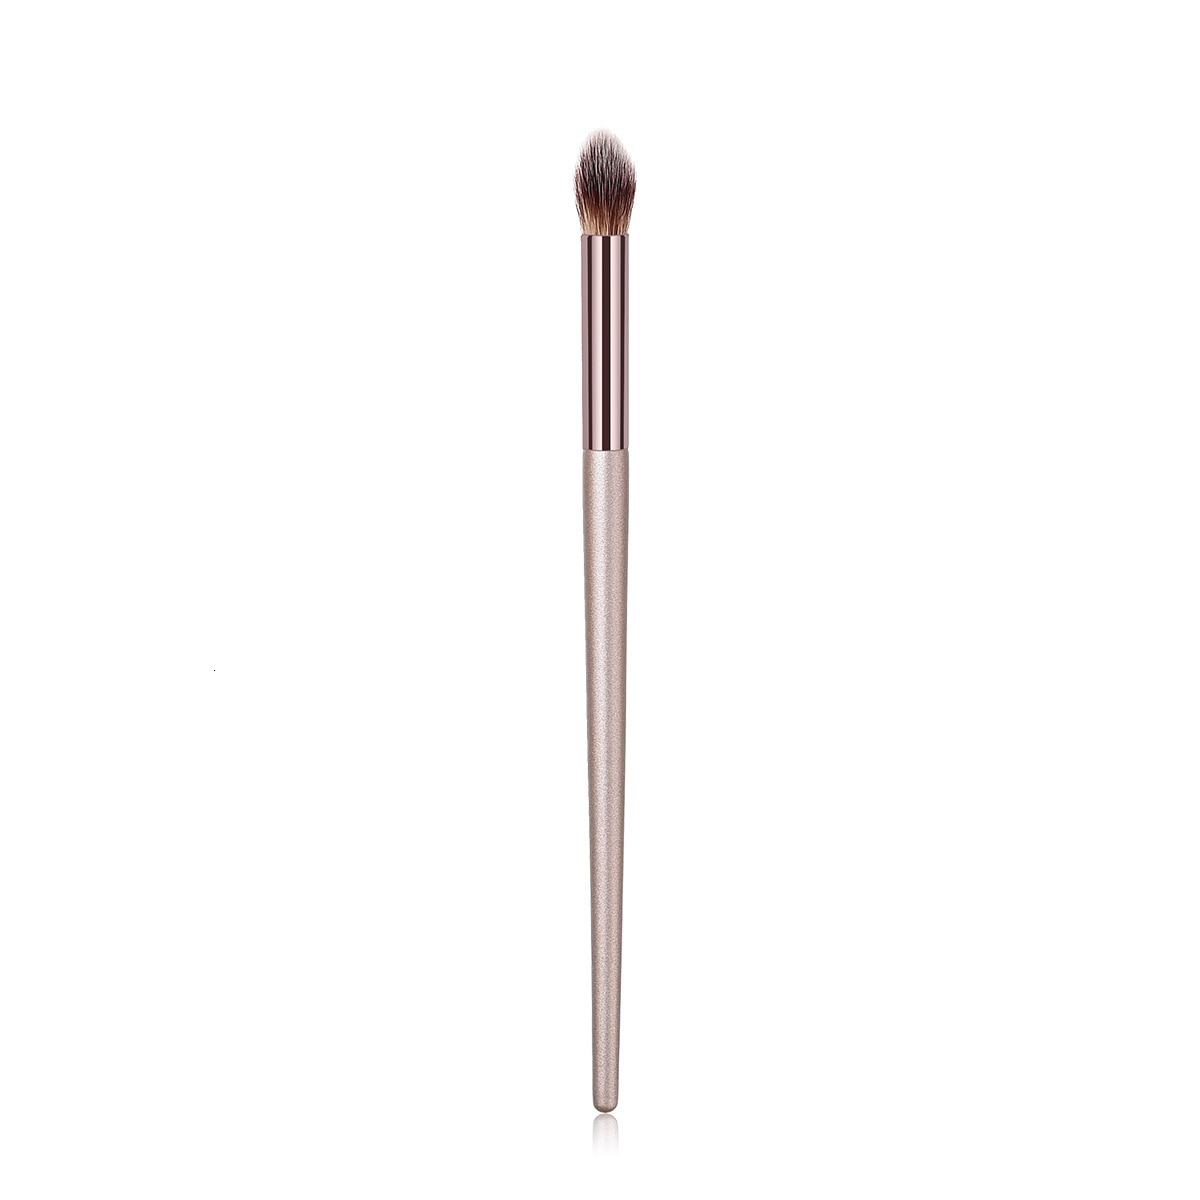 Brushes Champagne Makeup Concealer - SixtyKey new model design Dubai fashion style 2021 best price